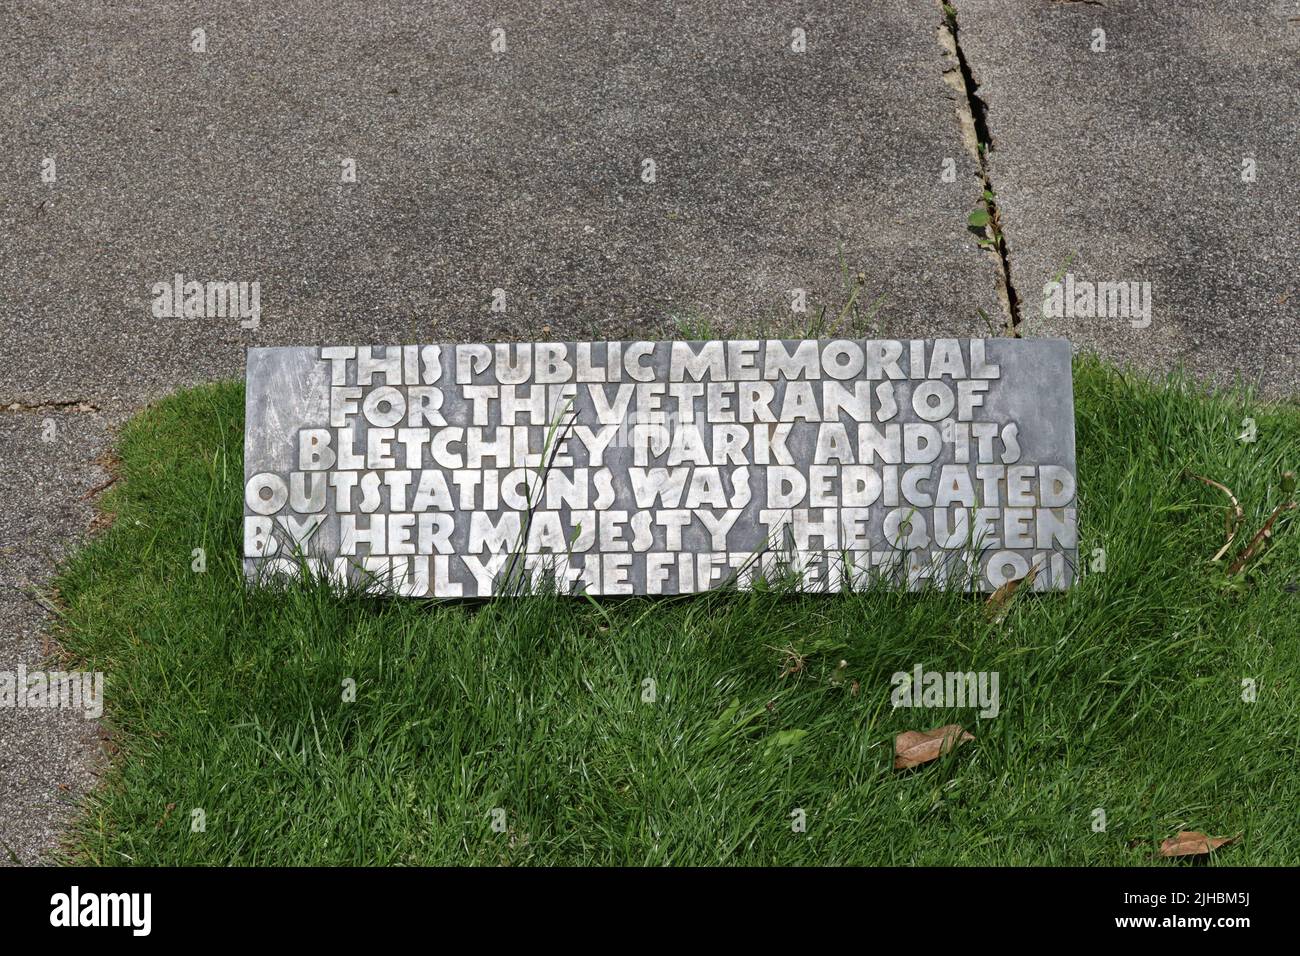 The Public Memorial dedicated by HM The Queen on 15th July 2011 to commemorate the numerous veterans who worked at Bletchley Park and its Outstations. Stock Photo